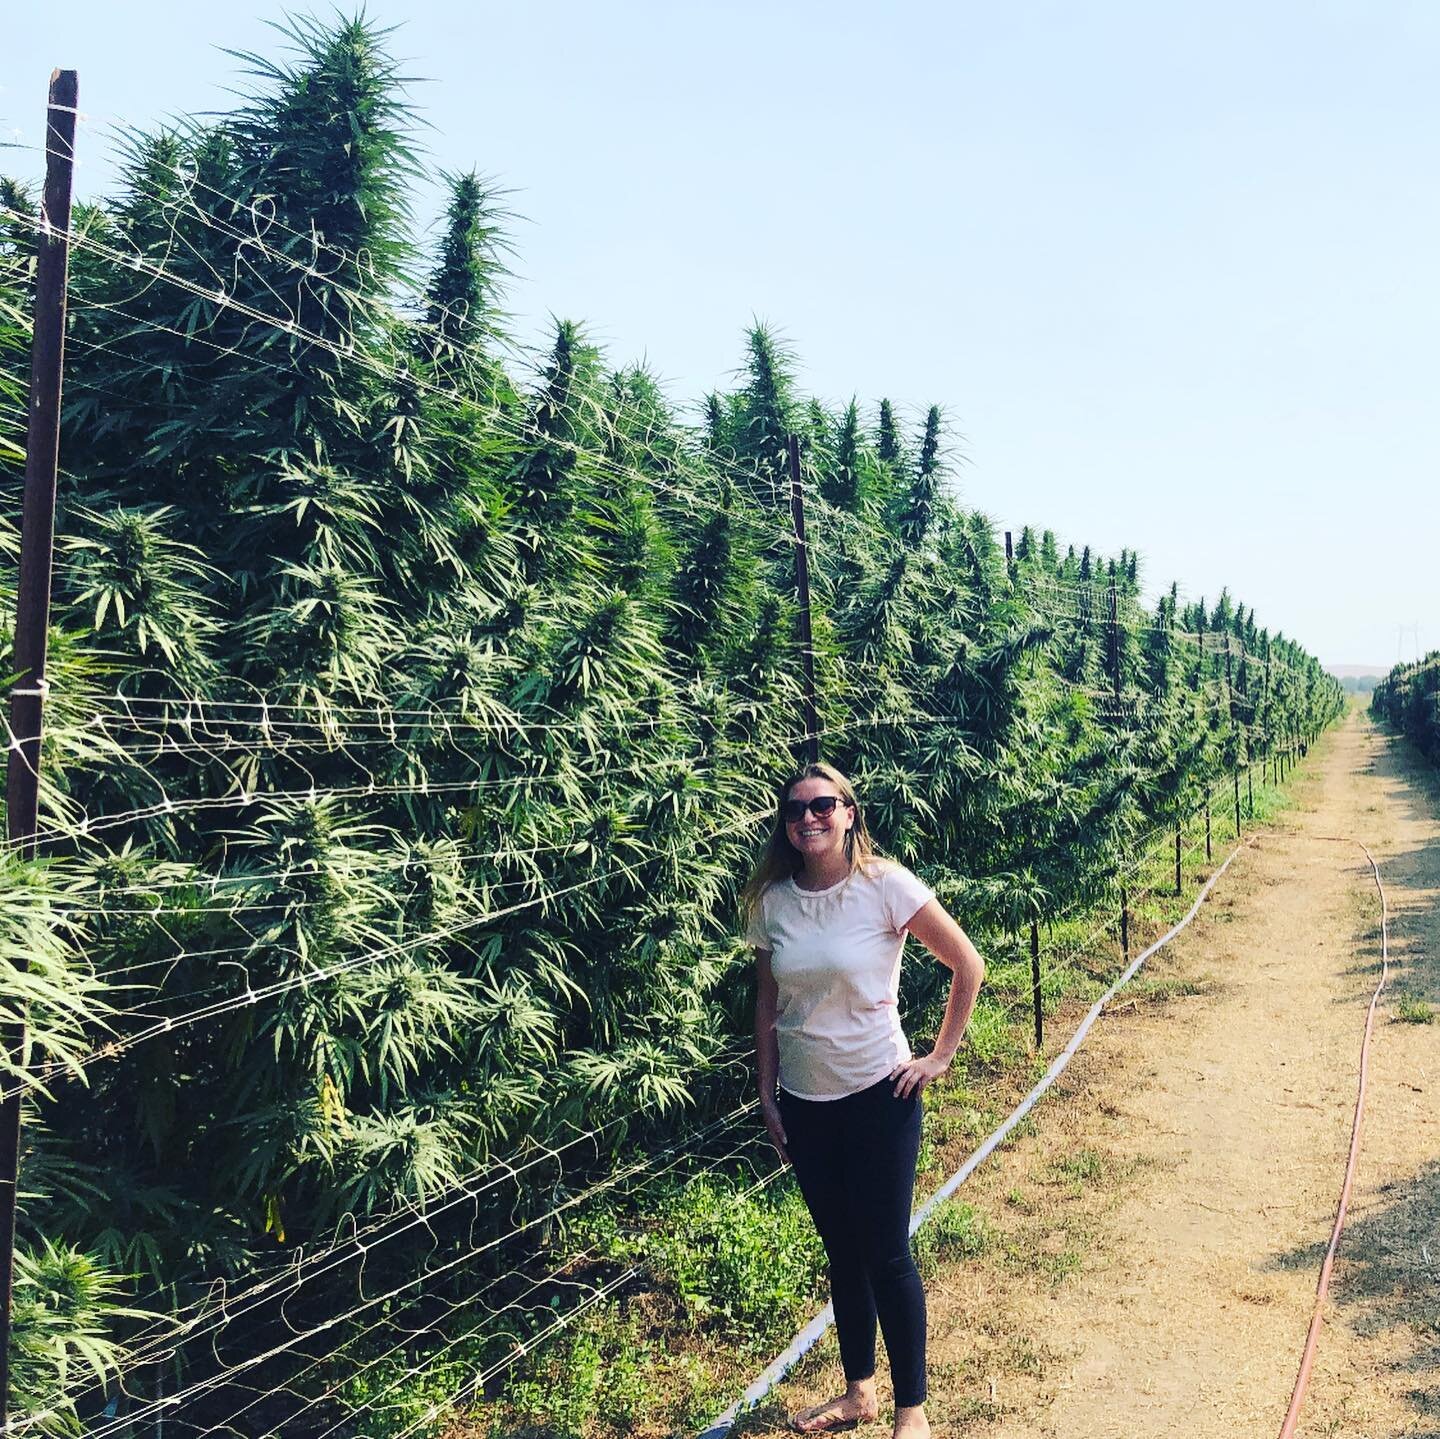 What a year in #DunniganHills it&rsquo;s been. 13 footers and .35lb dried colas. Organic @geoflora.nutrients really helped us get to the next level this year. #cannabiscommunity #cannabis #cannabisculture #joyridgefarms #thc #indica #sativa #pot #wee